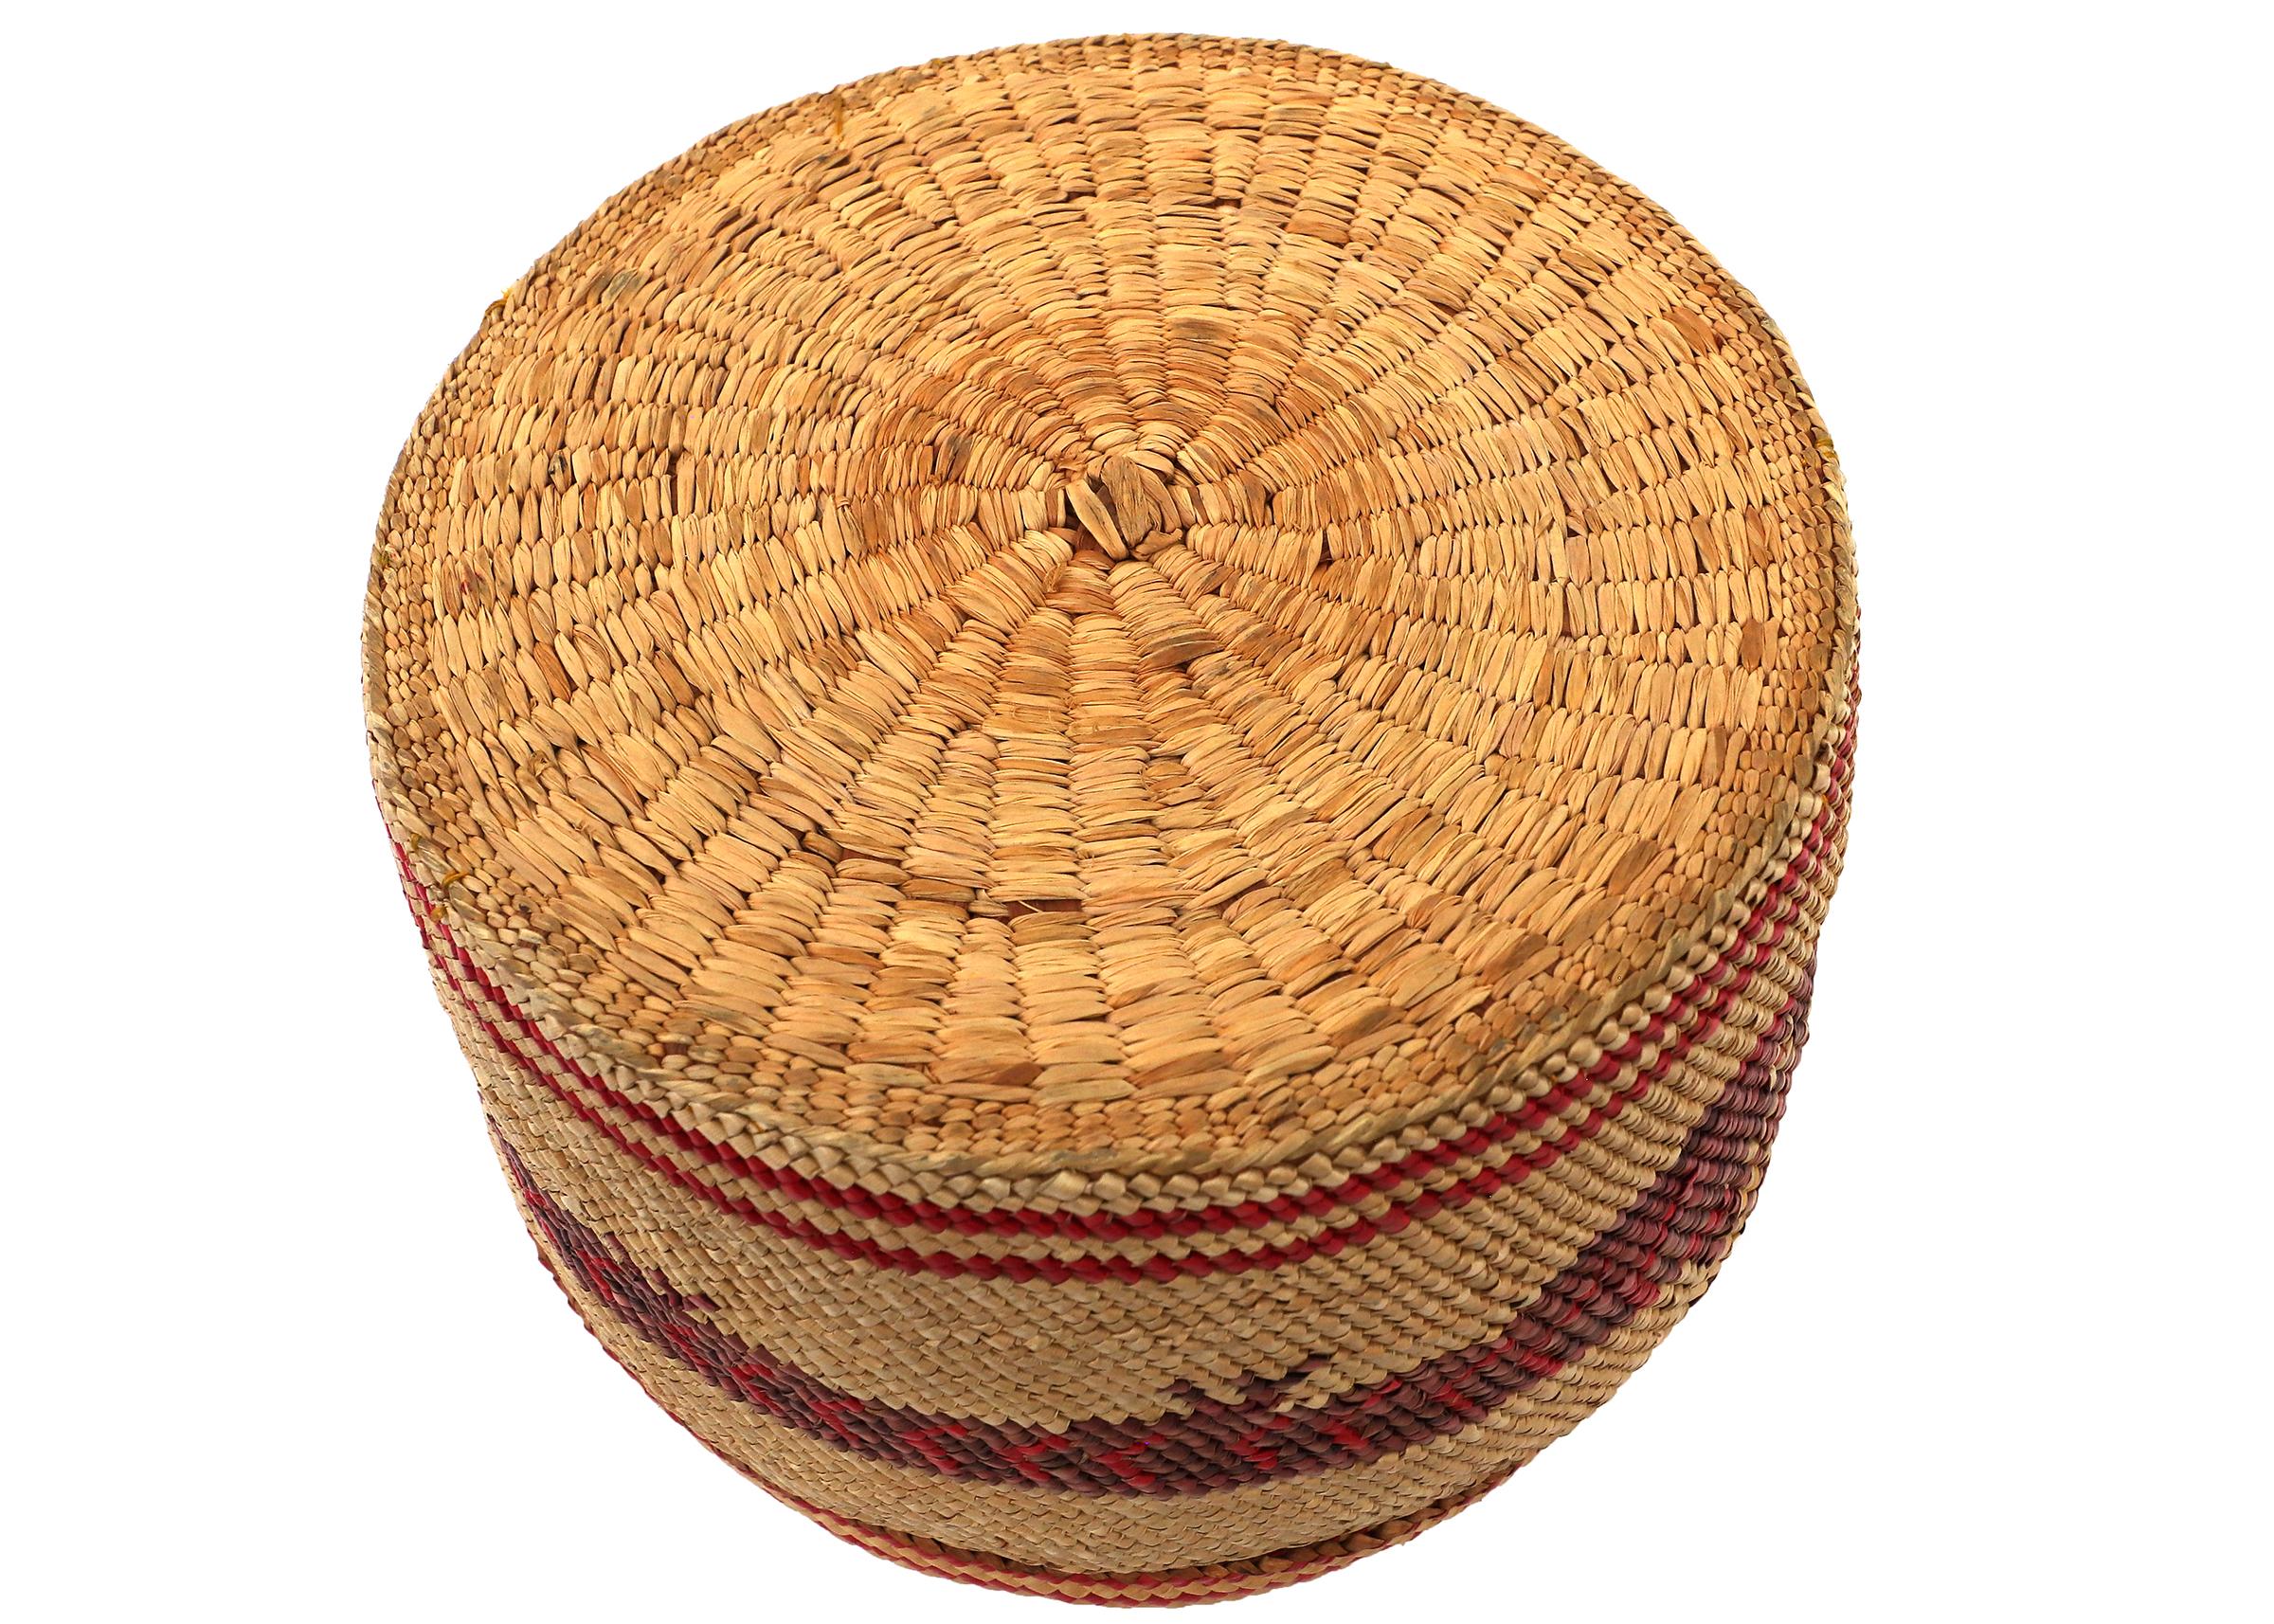 Northwest coast lidded basket from the Nootka tribe circa 1900 with a red sea wolf design. Measures 3 ½ x 5 ½ inches.